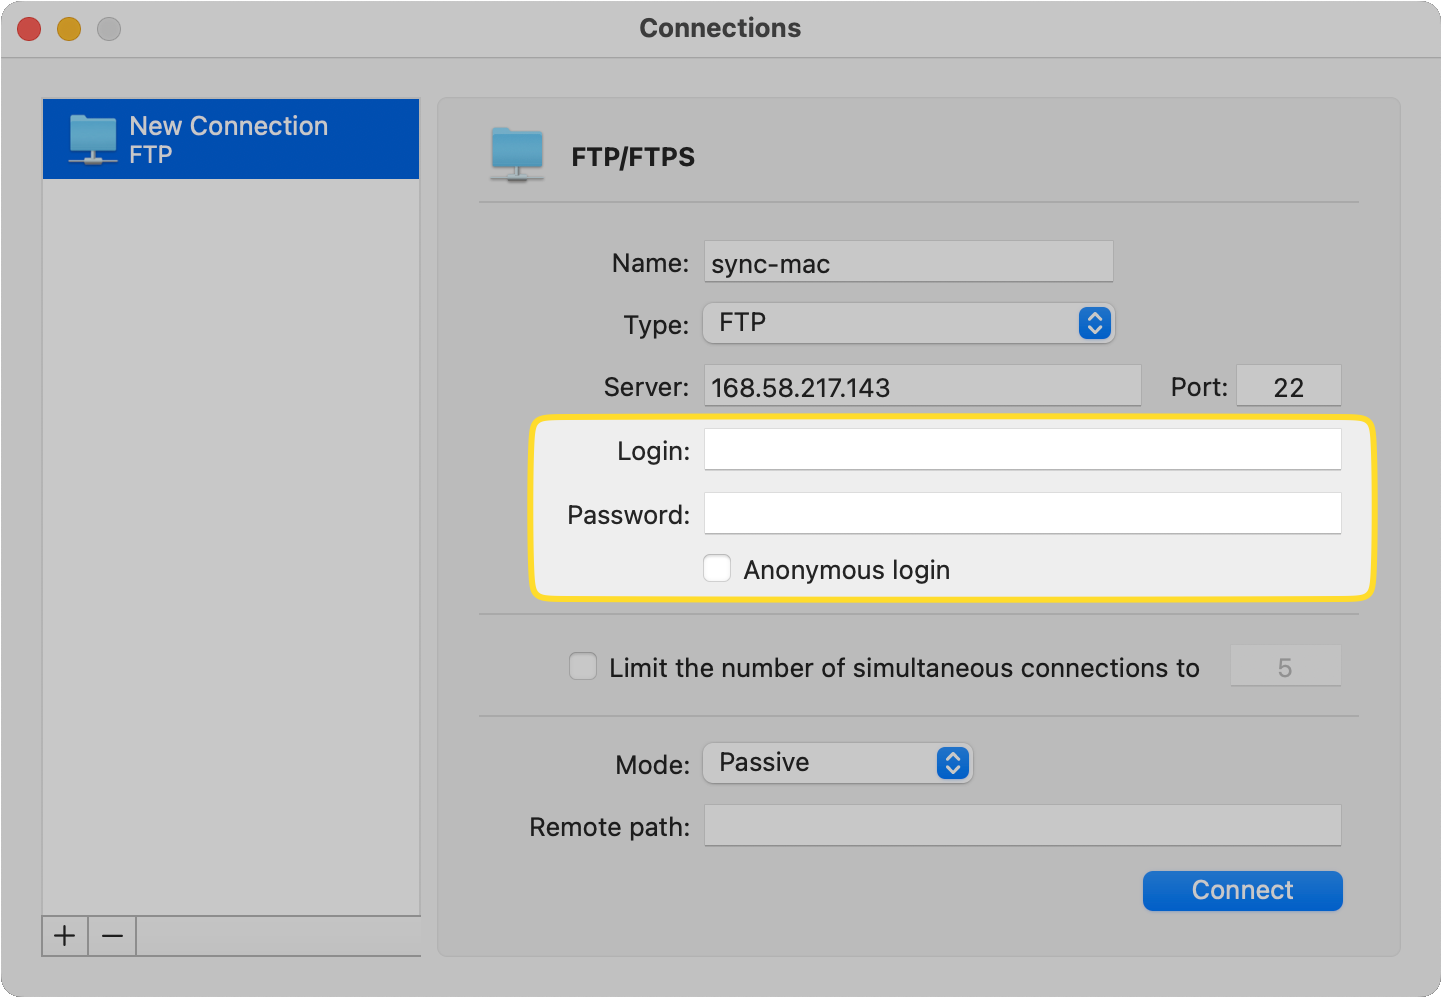 The Login and Password fields of the new FTP connection are highlighted